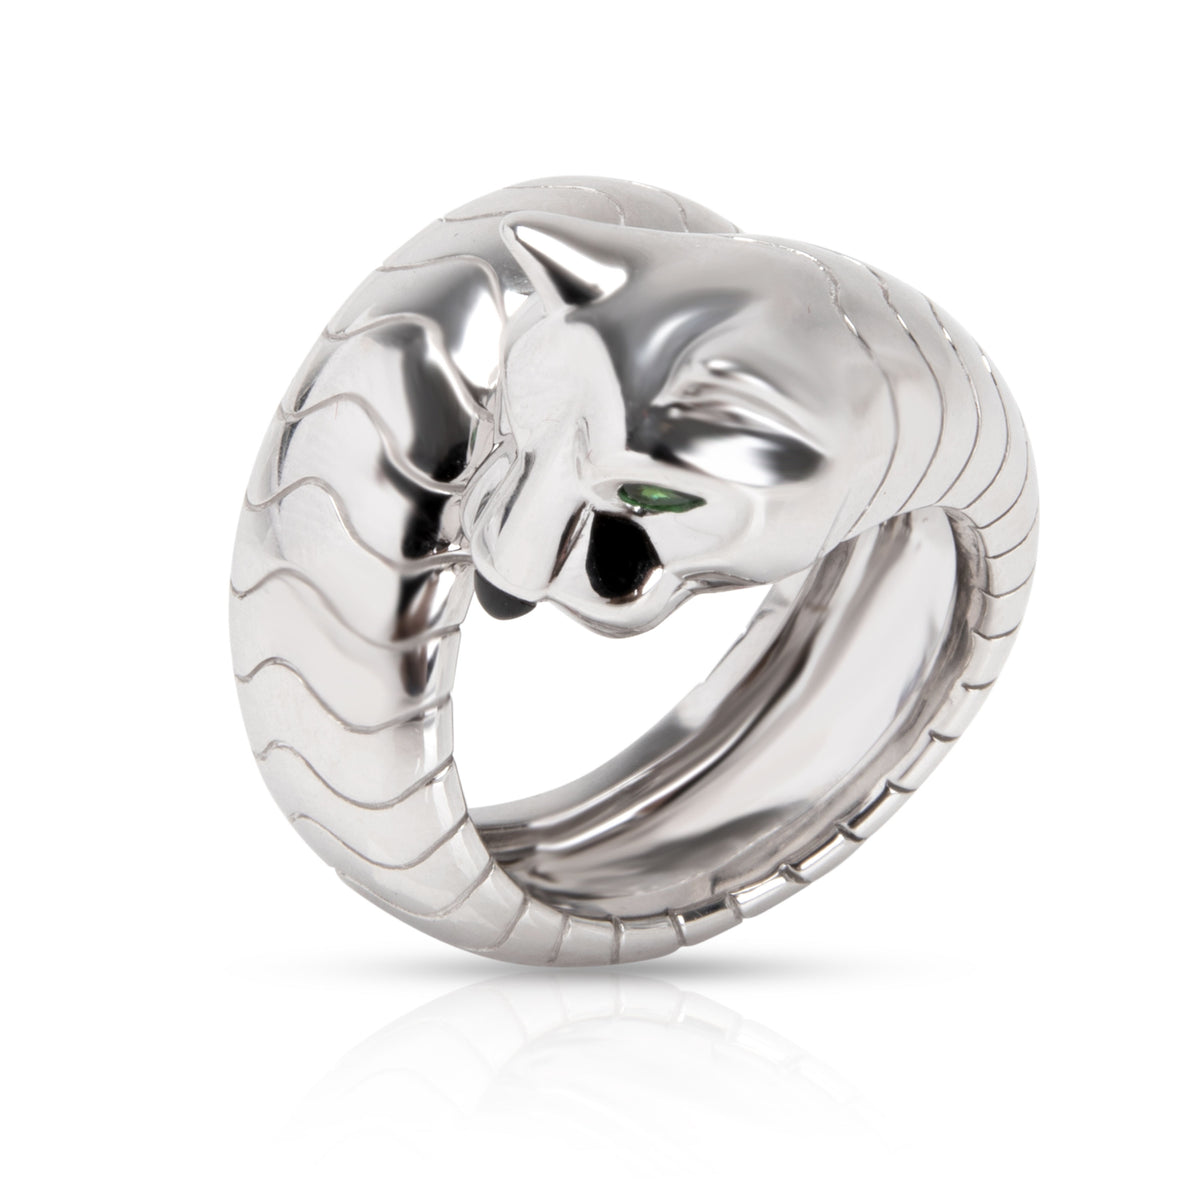 Cartier Panthere de Cartier Ring in 18K White Gold